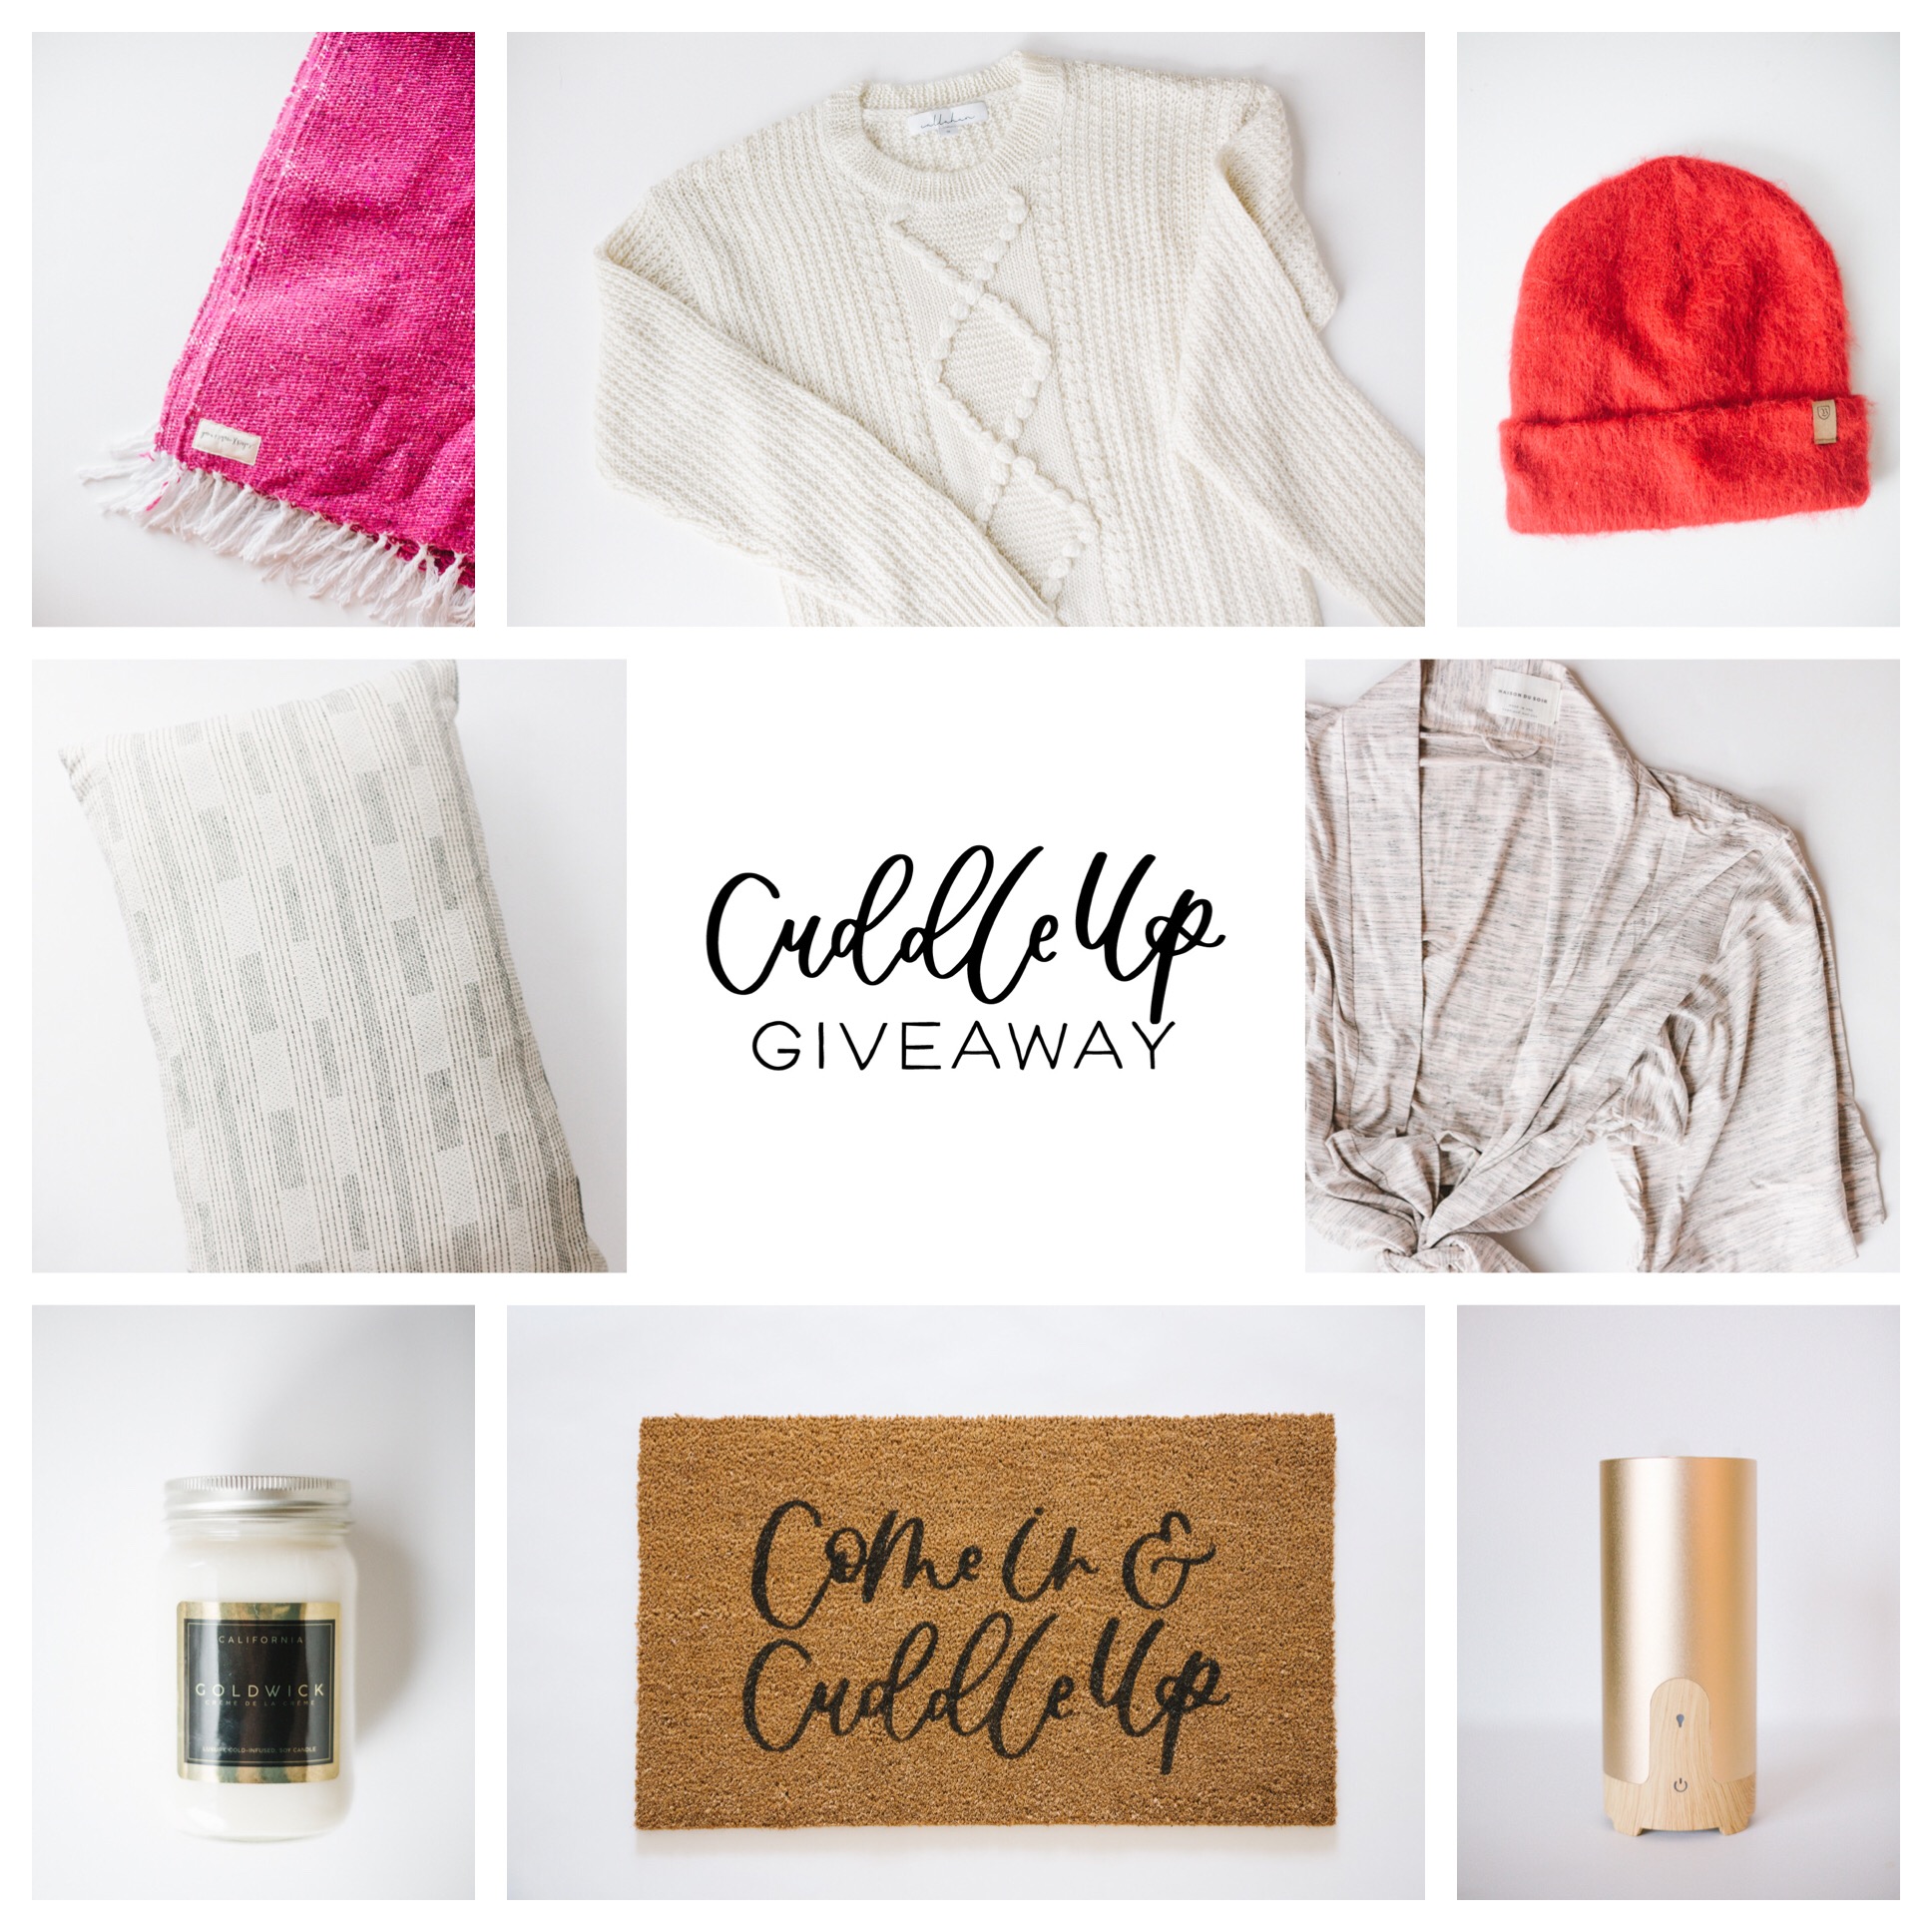 Cuddle Up this Winter with this Amazing Giveaway!